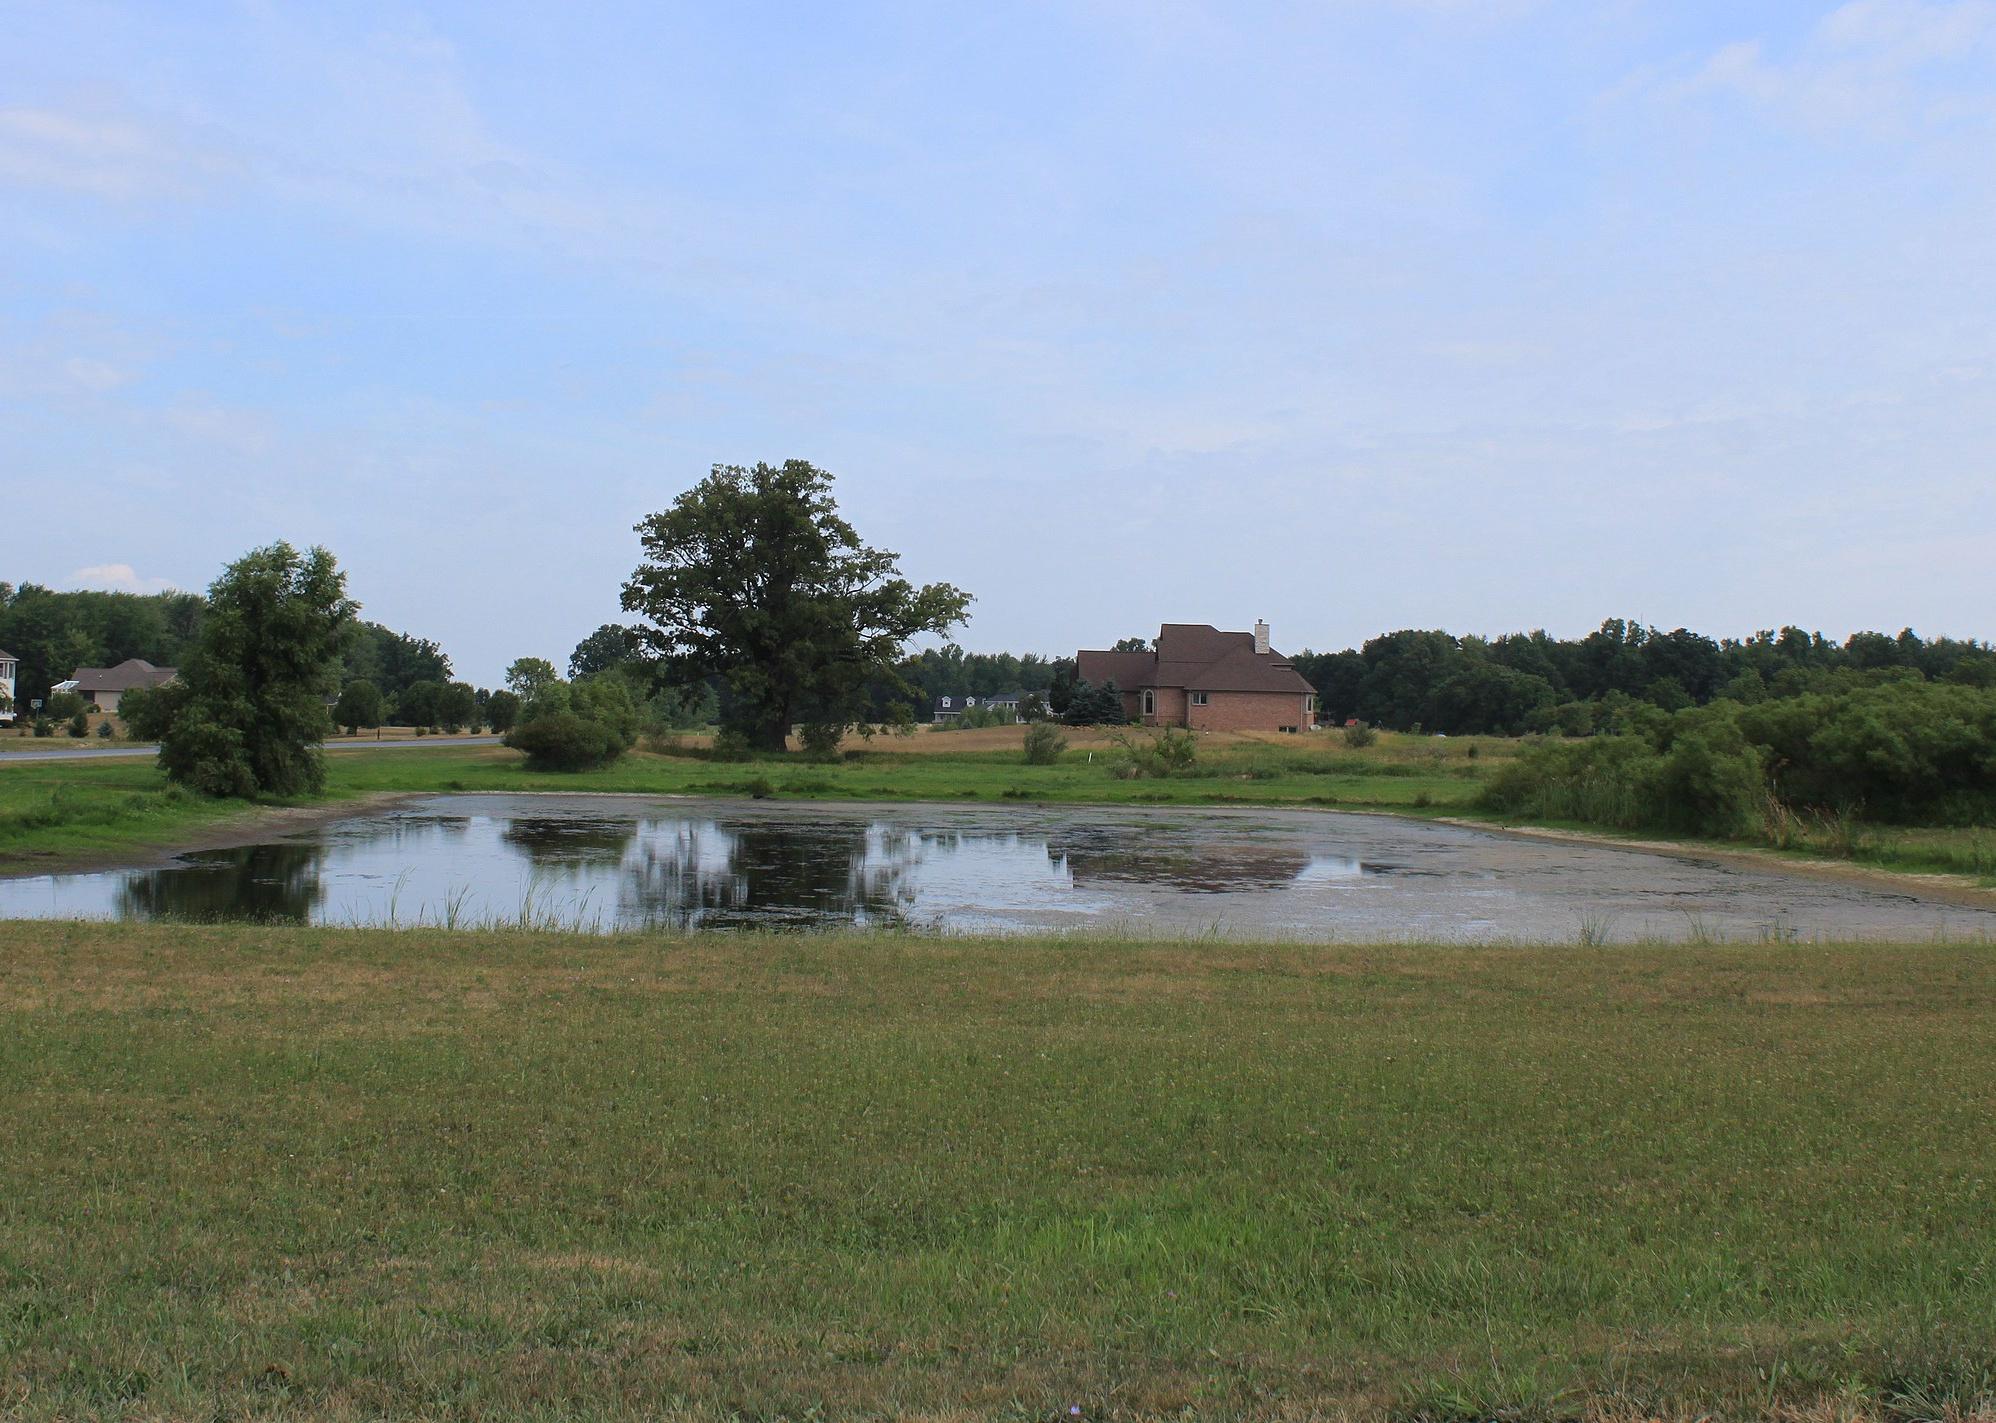 Rural homes with a pond in the front.